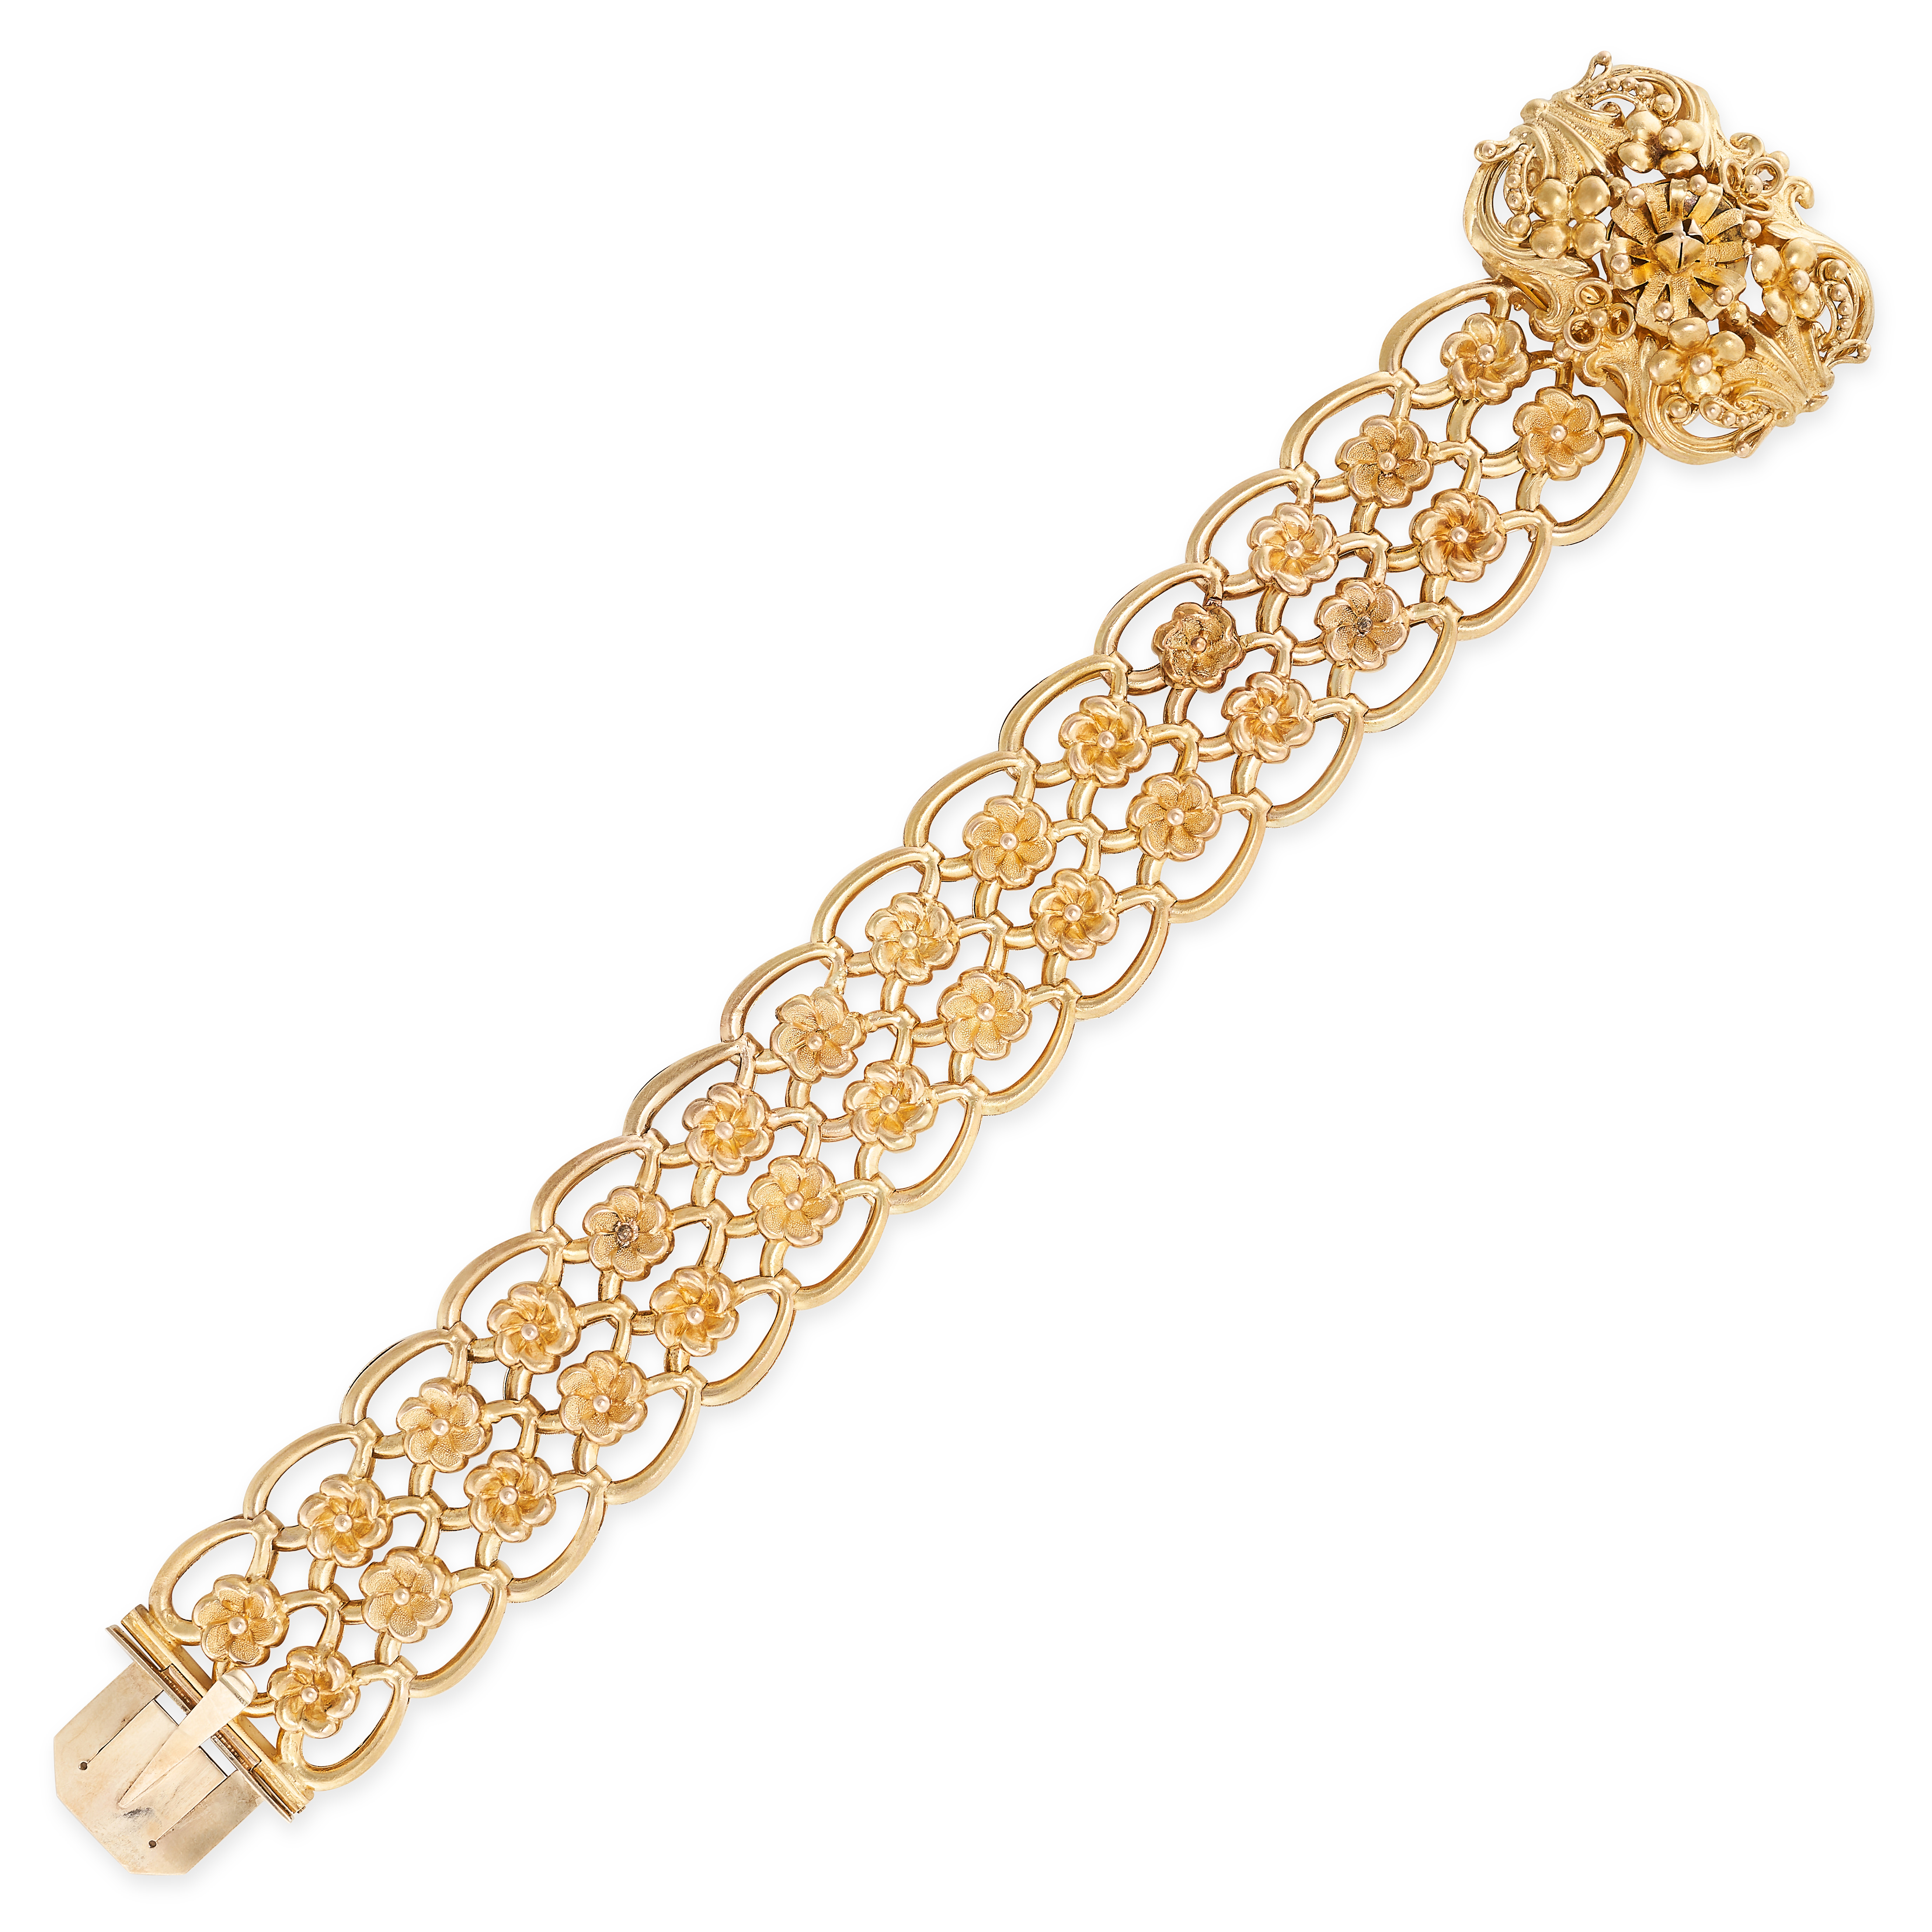 AN ANTIQUE FANCY LINK MOURNING LOCKET BRACELET, 19TH CENTURY in yellow gold, the bracelet formed